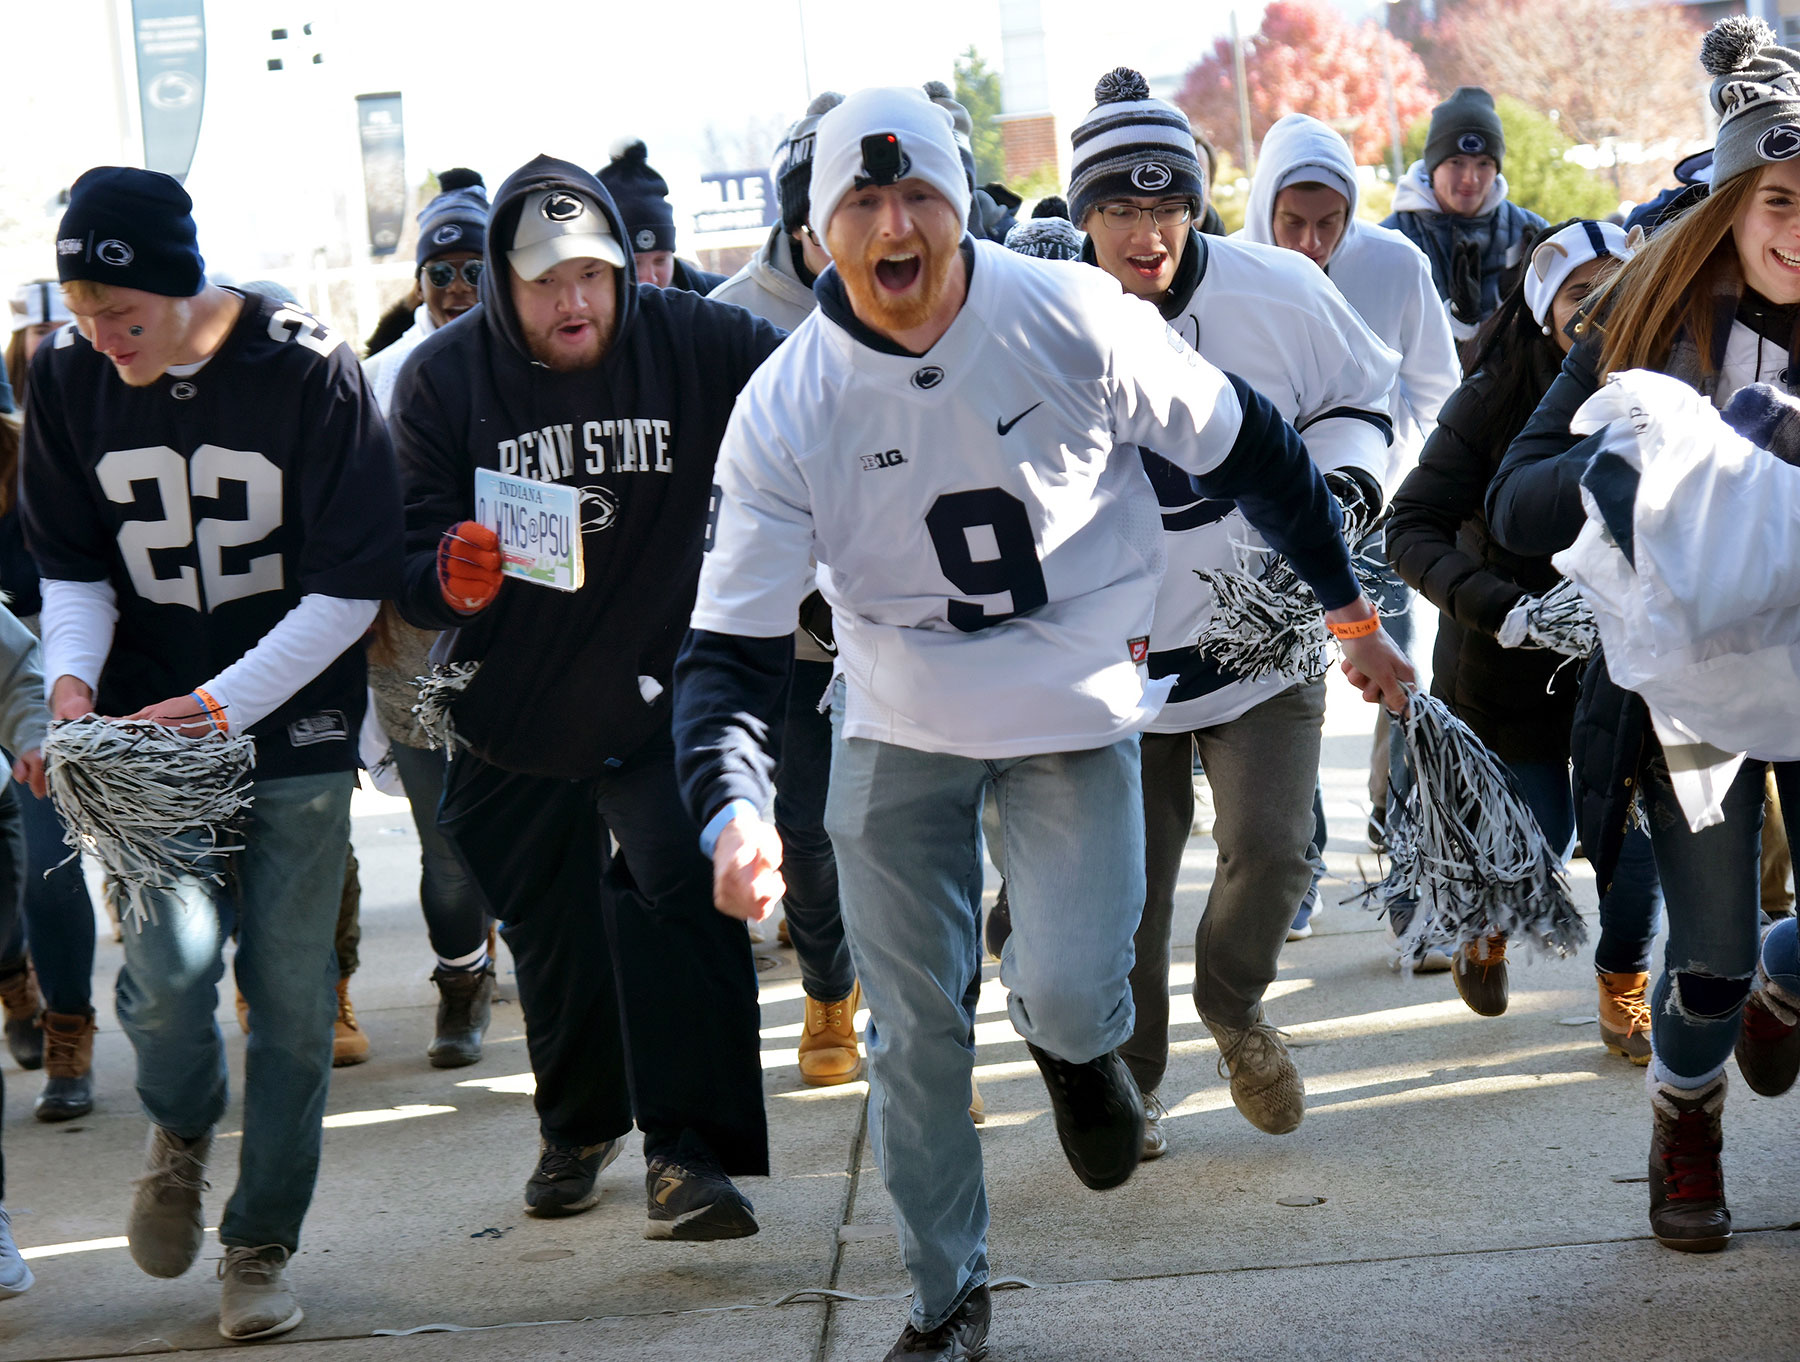 A crowd of fans dressed in Penn State gear running into the stadium to get the best seats in the student section.